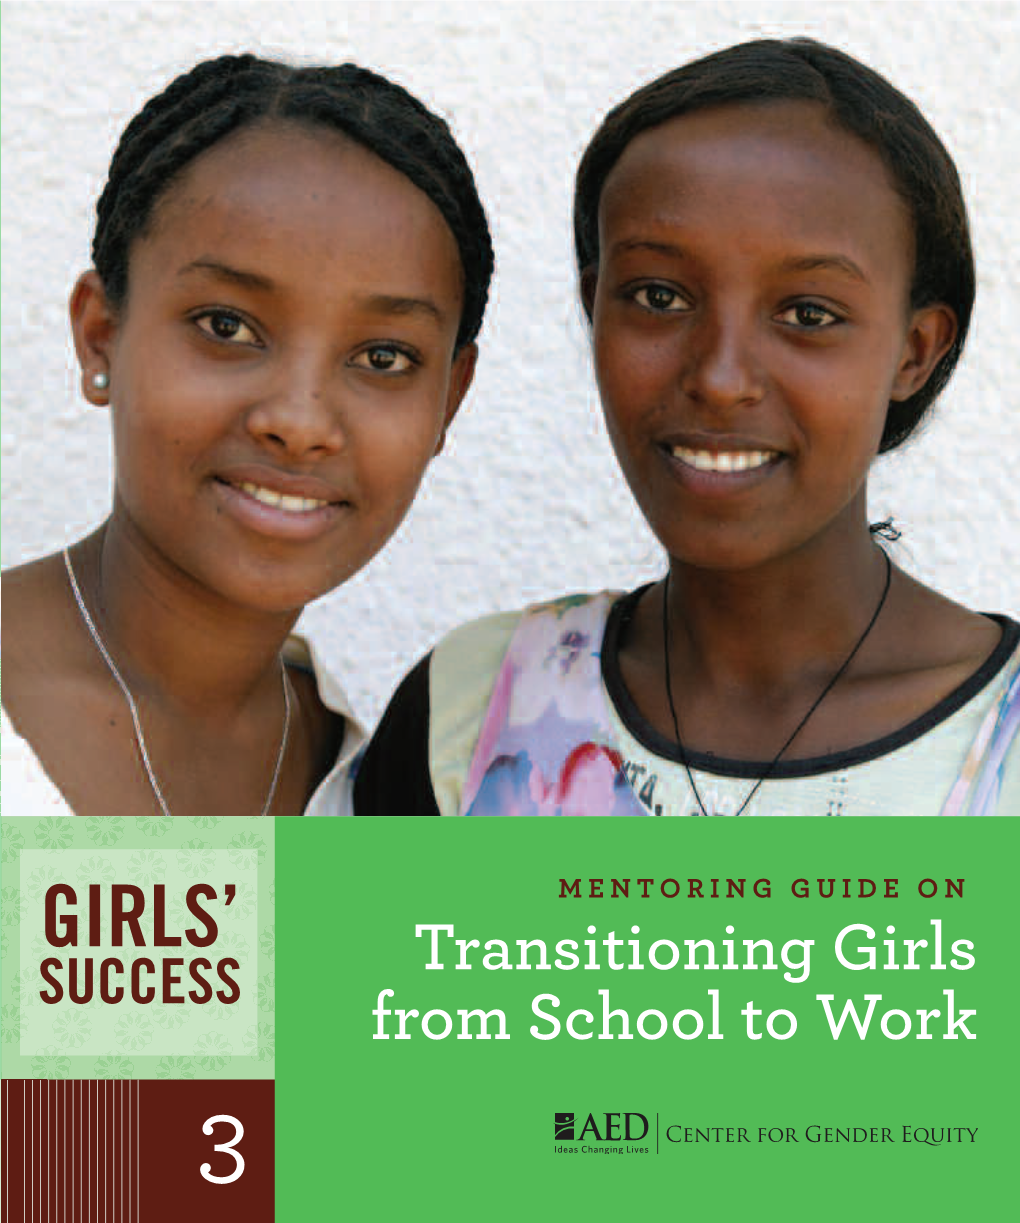 Mentoring-Guide-On-Transitioning-Girls-From-School-To-Work.Pdf